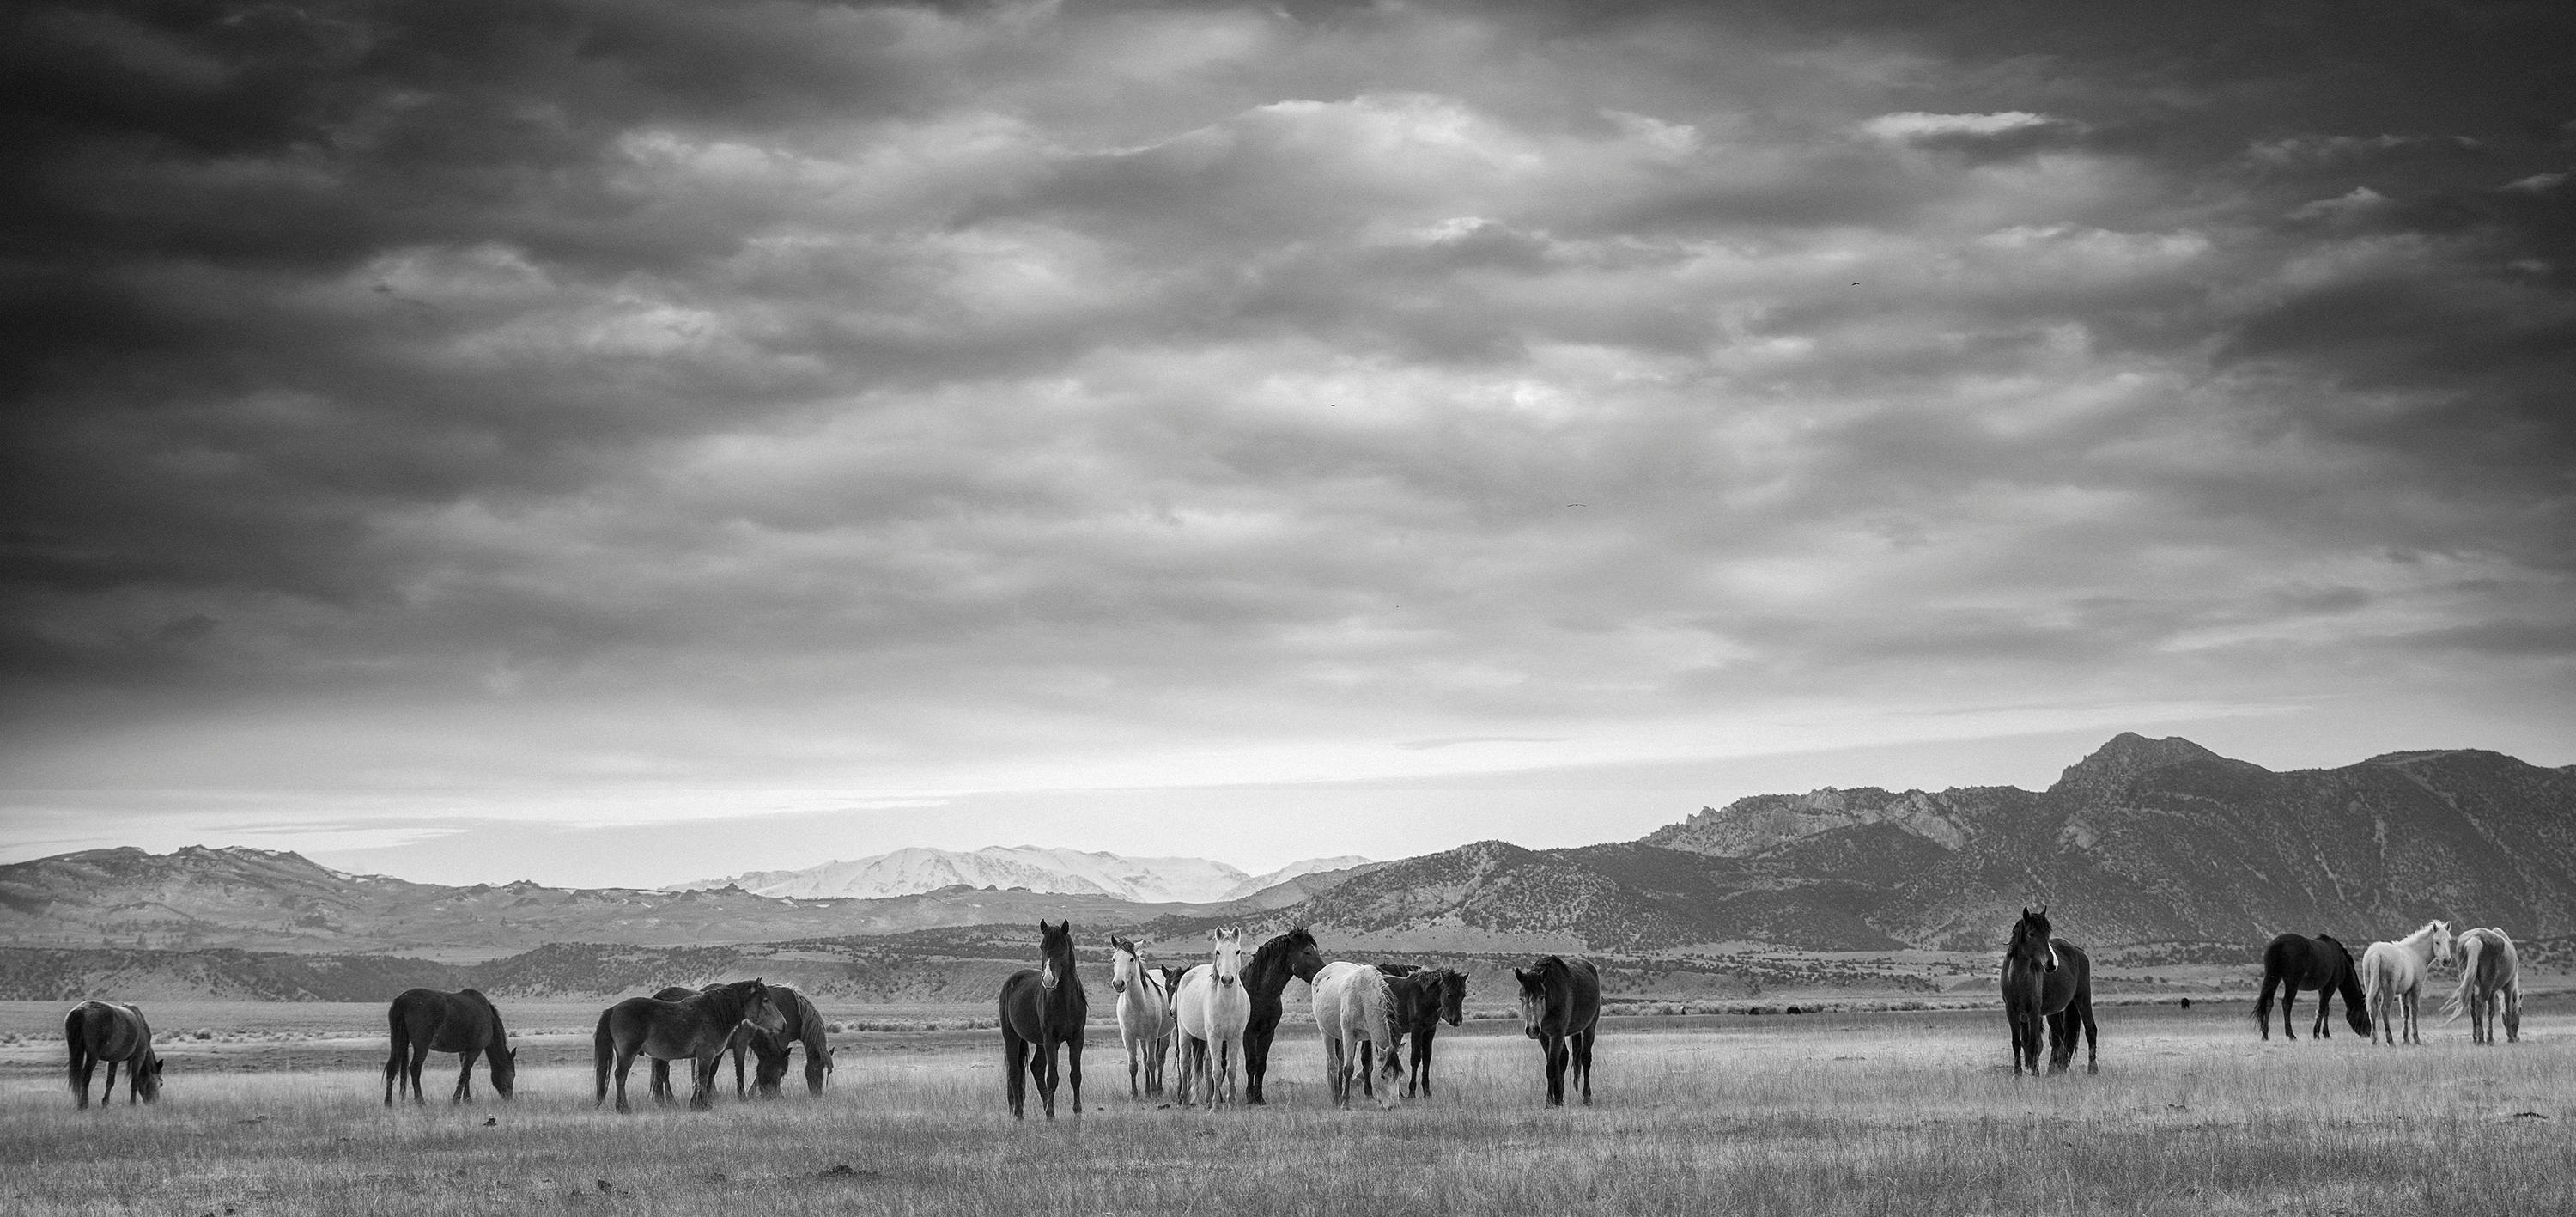 Shane Russeck Landscape Photograph - Black and White Wild Horse Photography, Mustangs "Gangs All Here" 25x40 , Signed